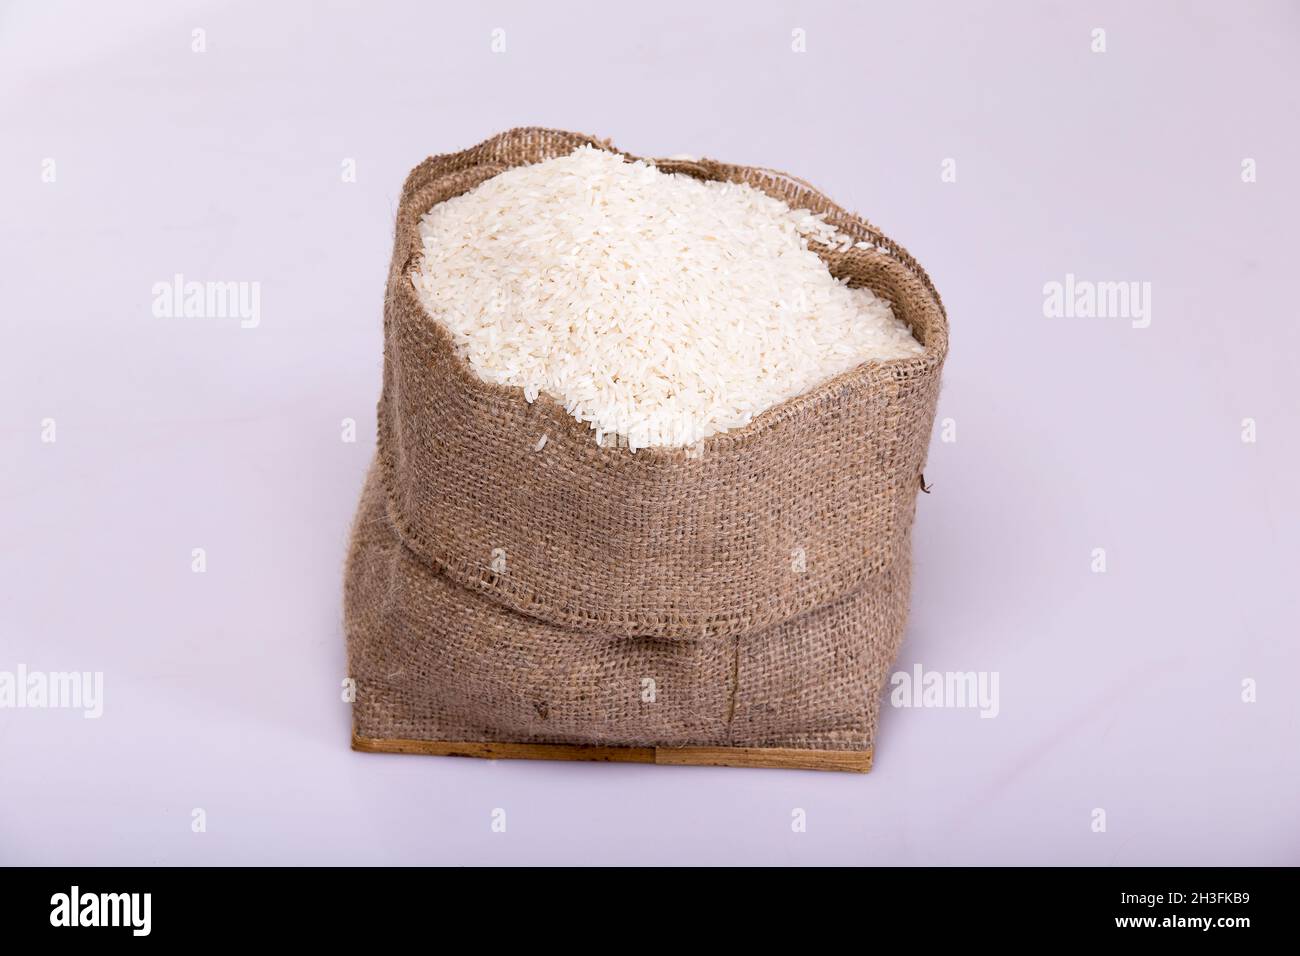 Rice Product Images In The Studio Stock Photo